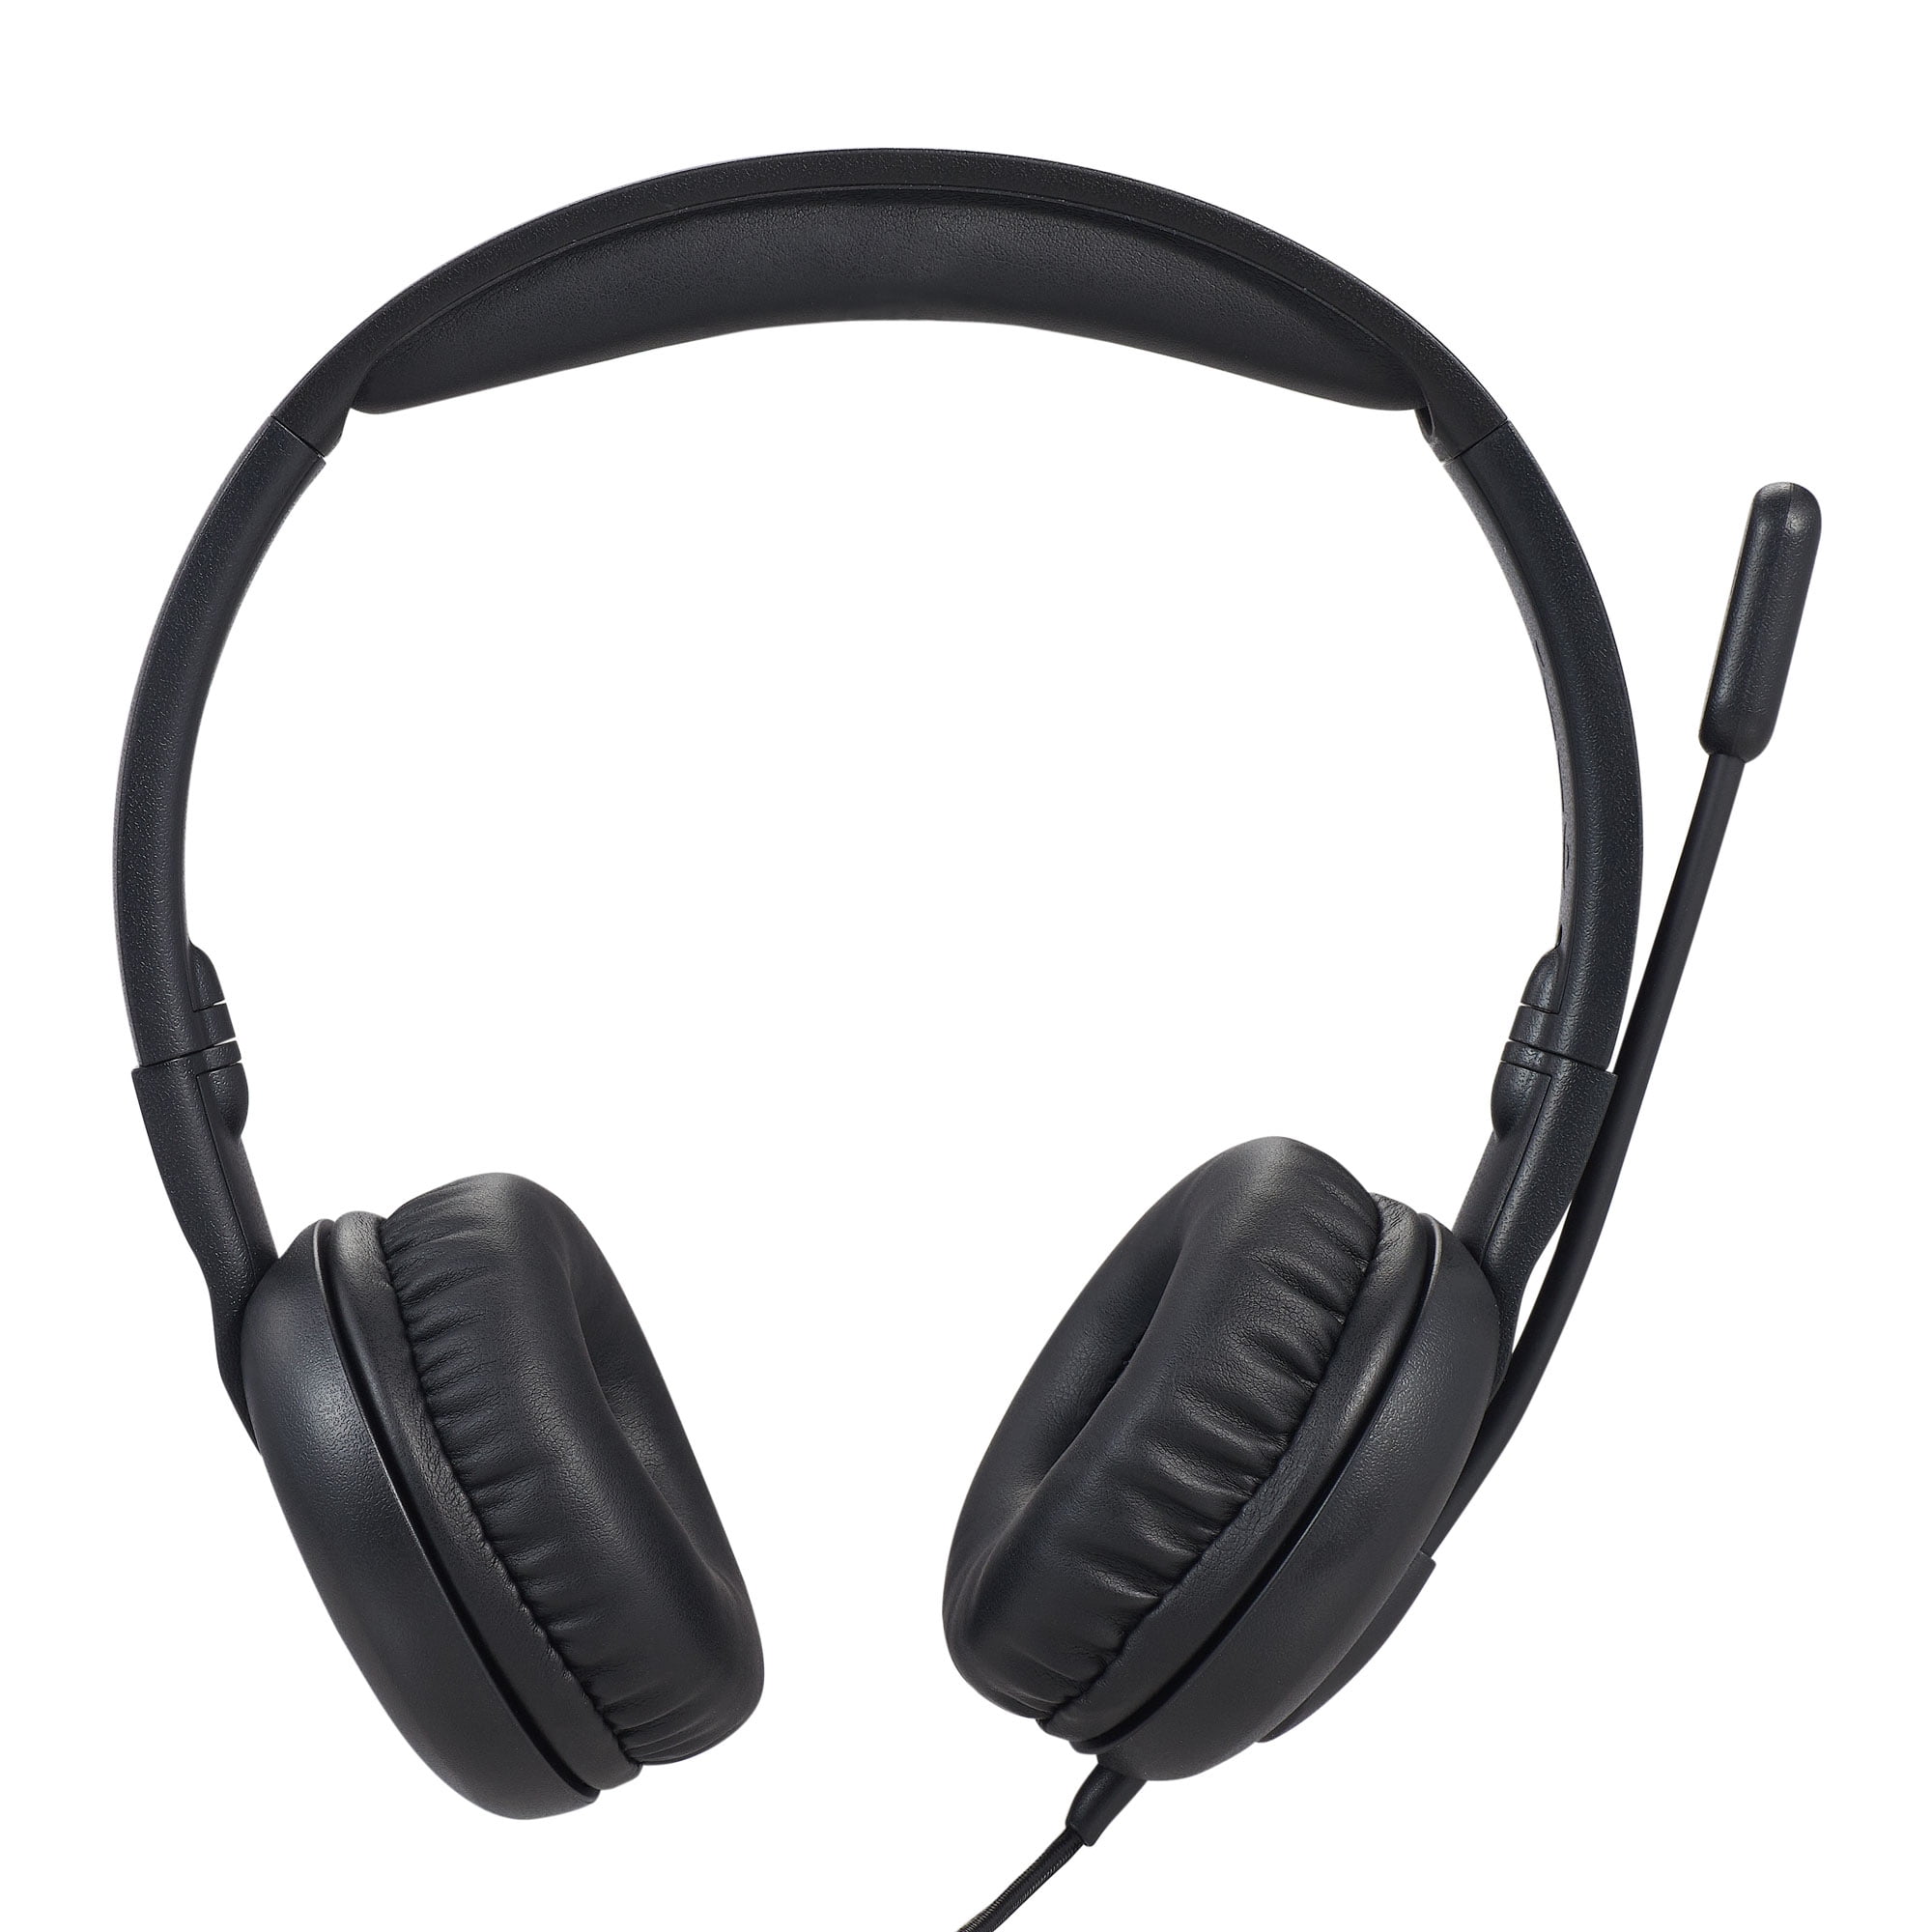 onn. USB On-Ear Stereo Headset with Rotating Boom Microphone